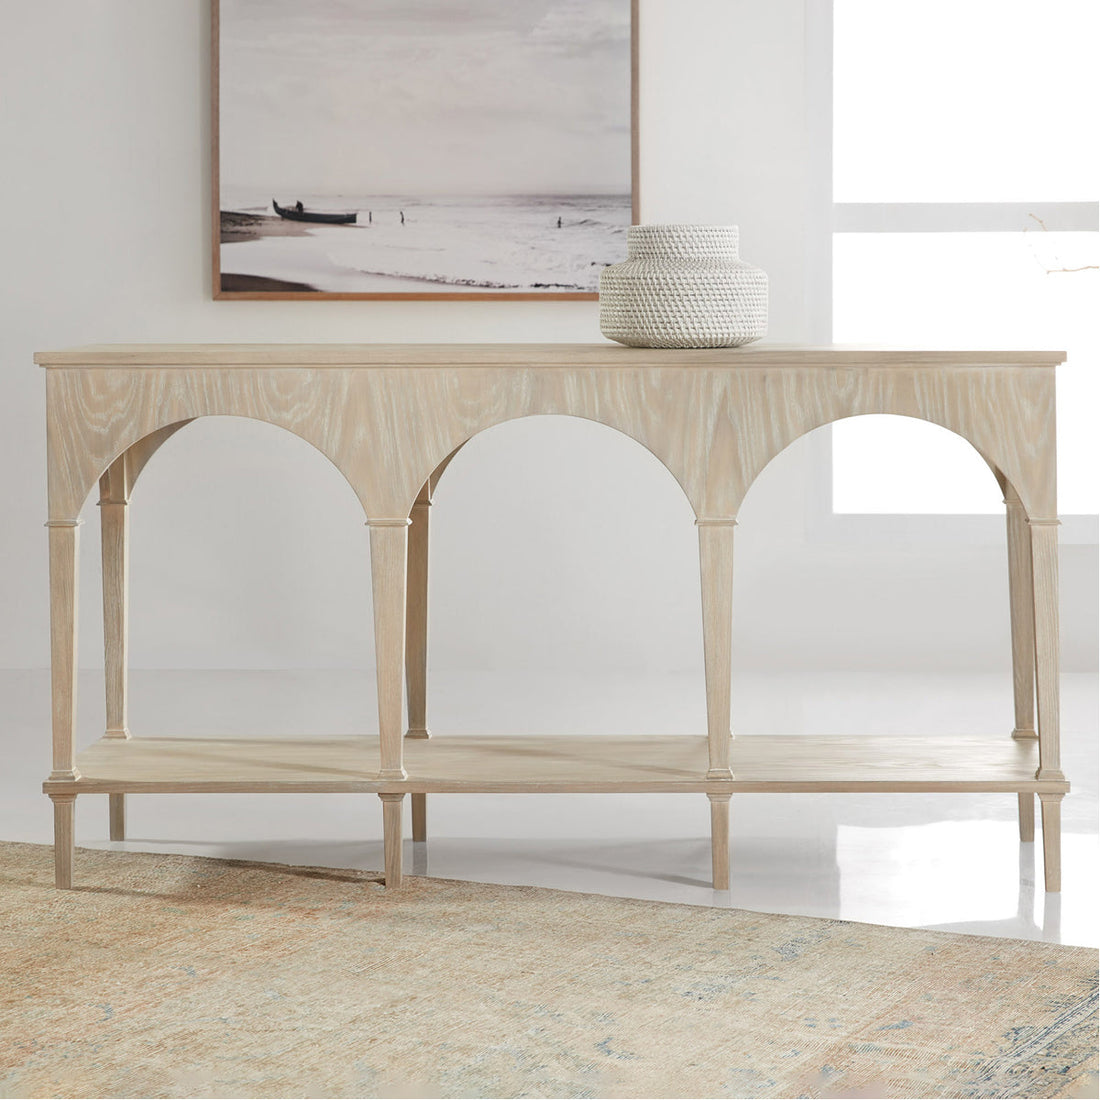 Somerset Bay Home Maui Arch Console Table